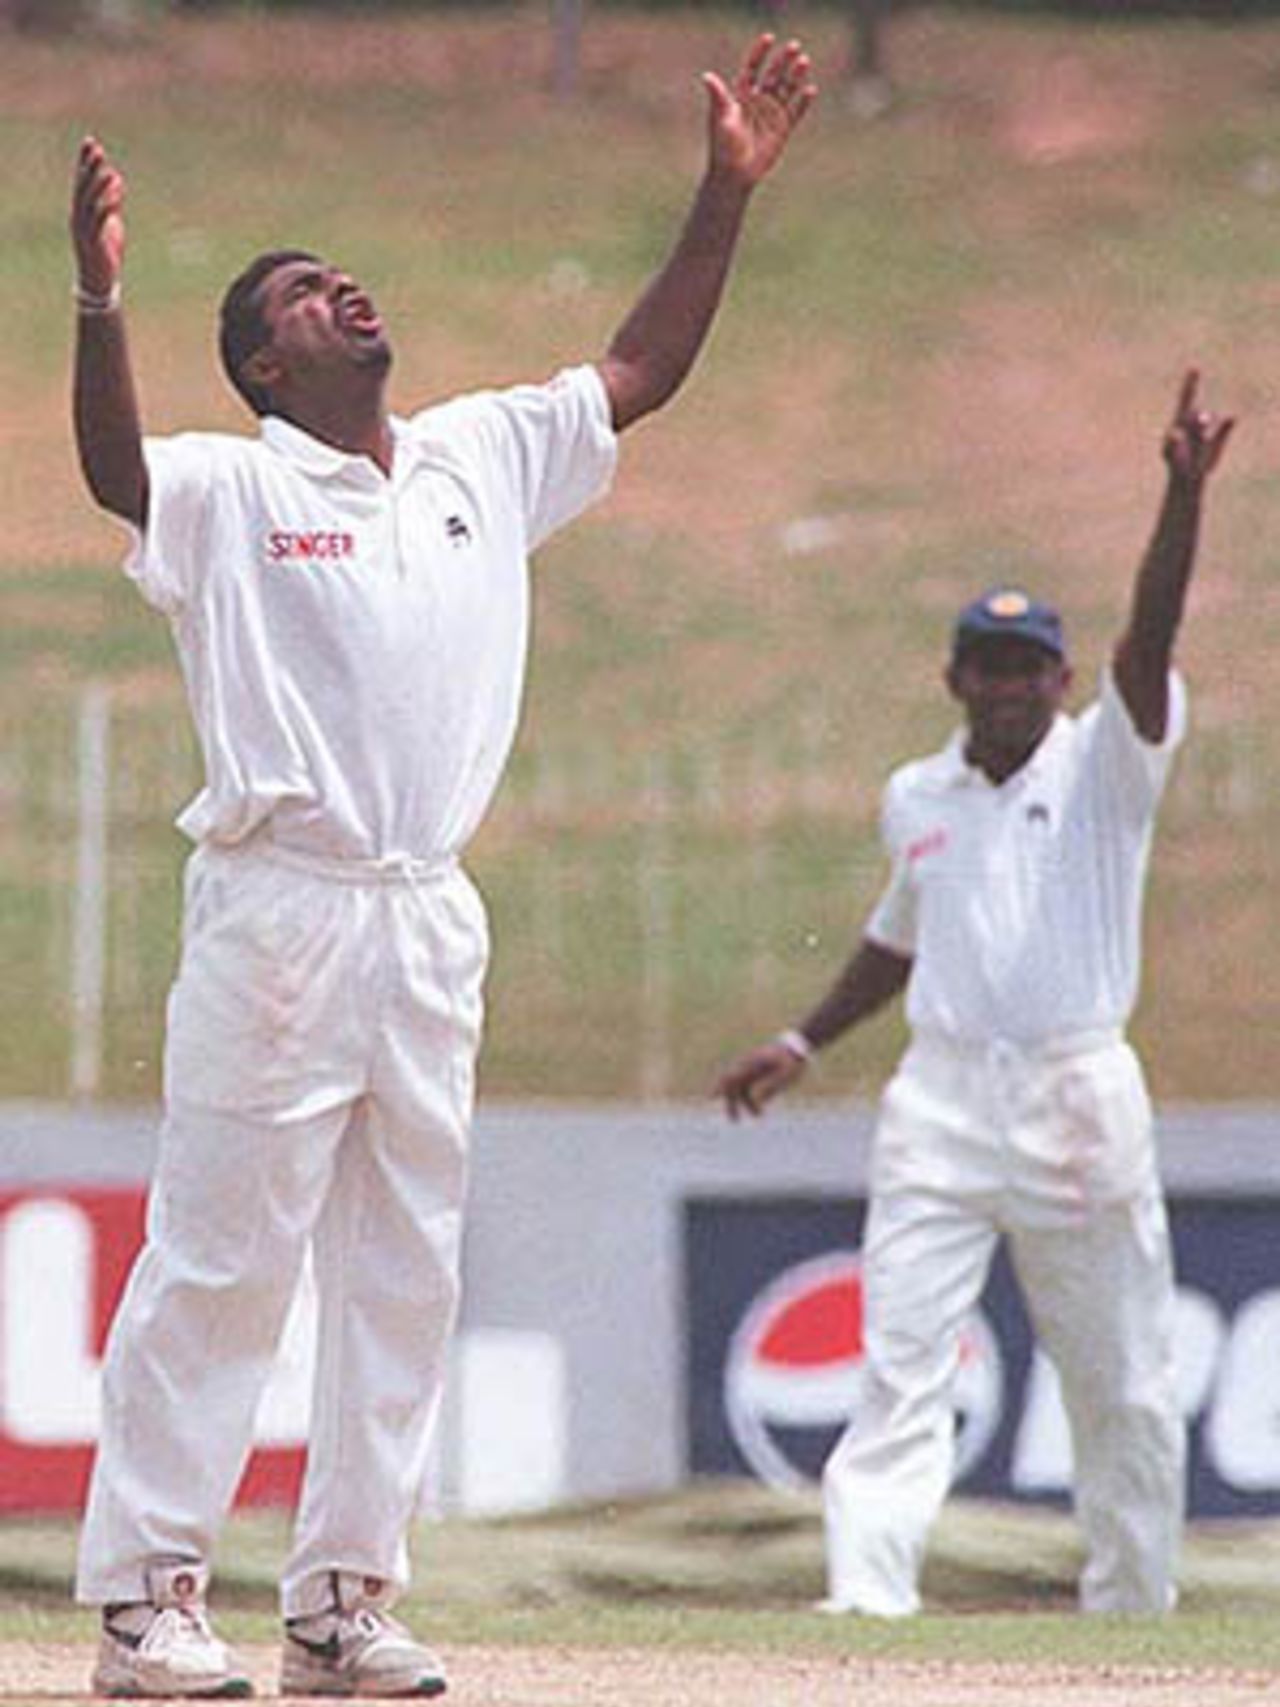 Muralitharan and Jayasuriya are disappointed after an appeal is turned down, South Africa in Sri Lanka, 2000/01, 3rd Test, Sri Lanka v South Africa, Sinhalese Sports Club Ground, Colombo, 06-10 August 2000 (Day 1).